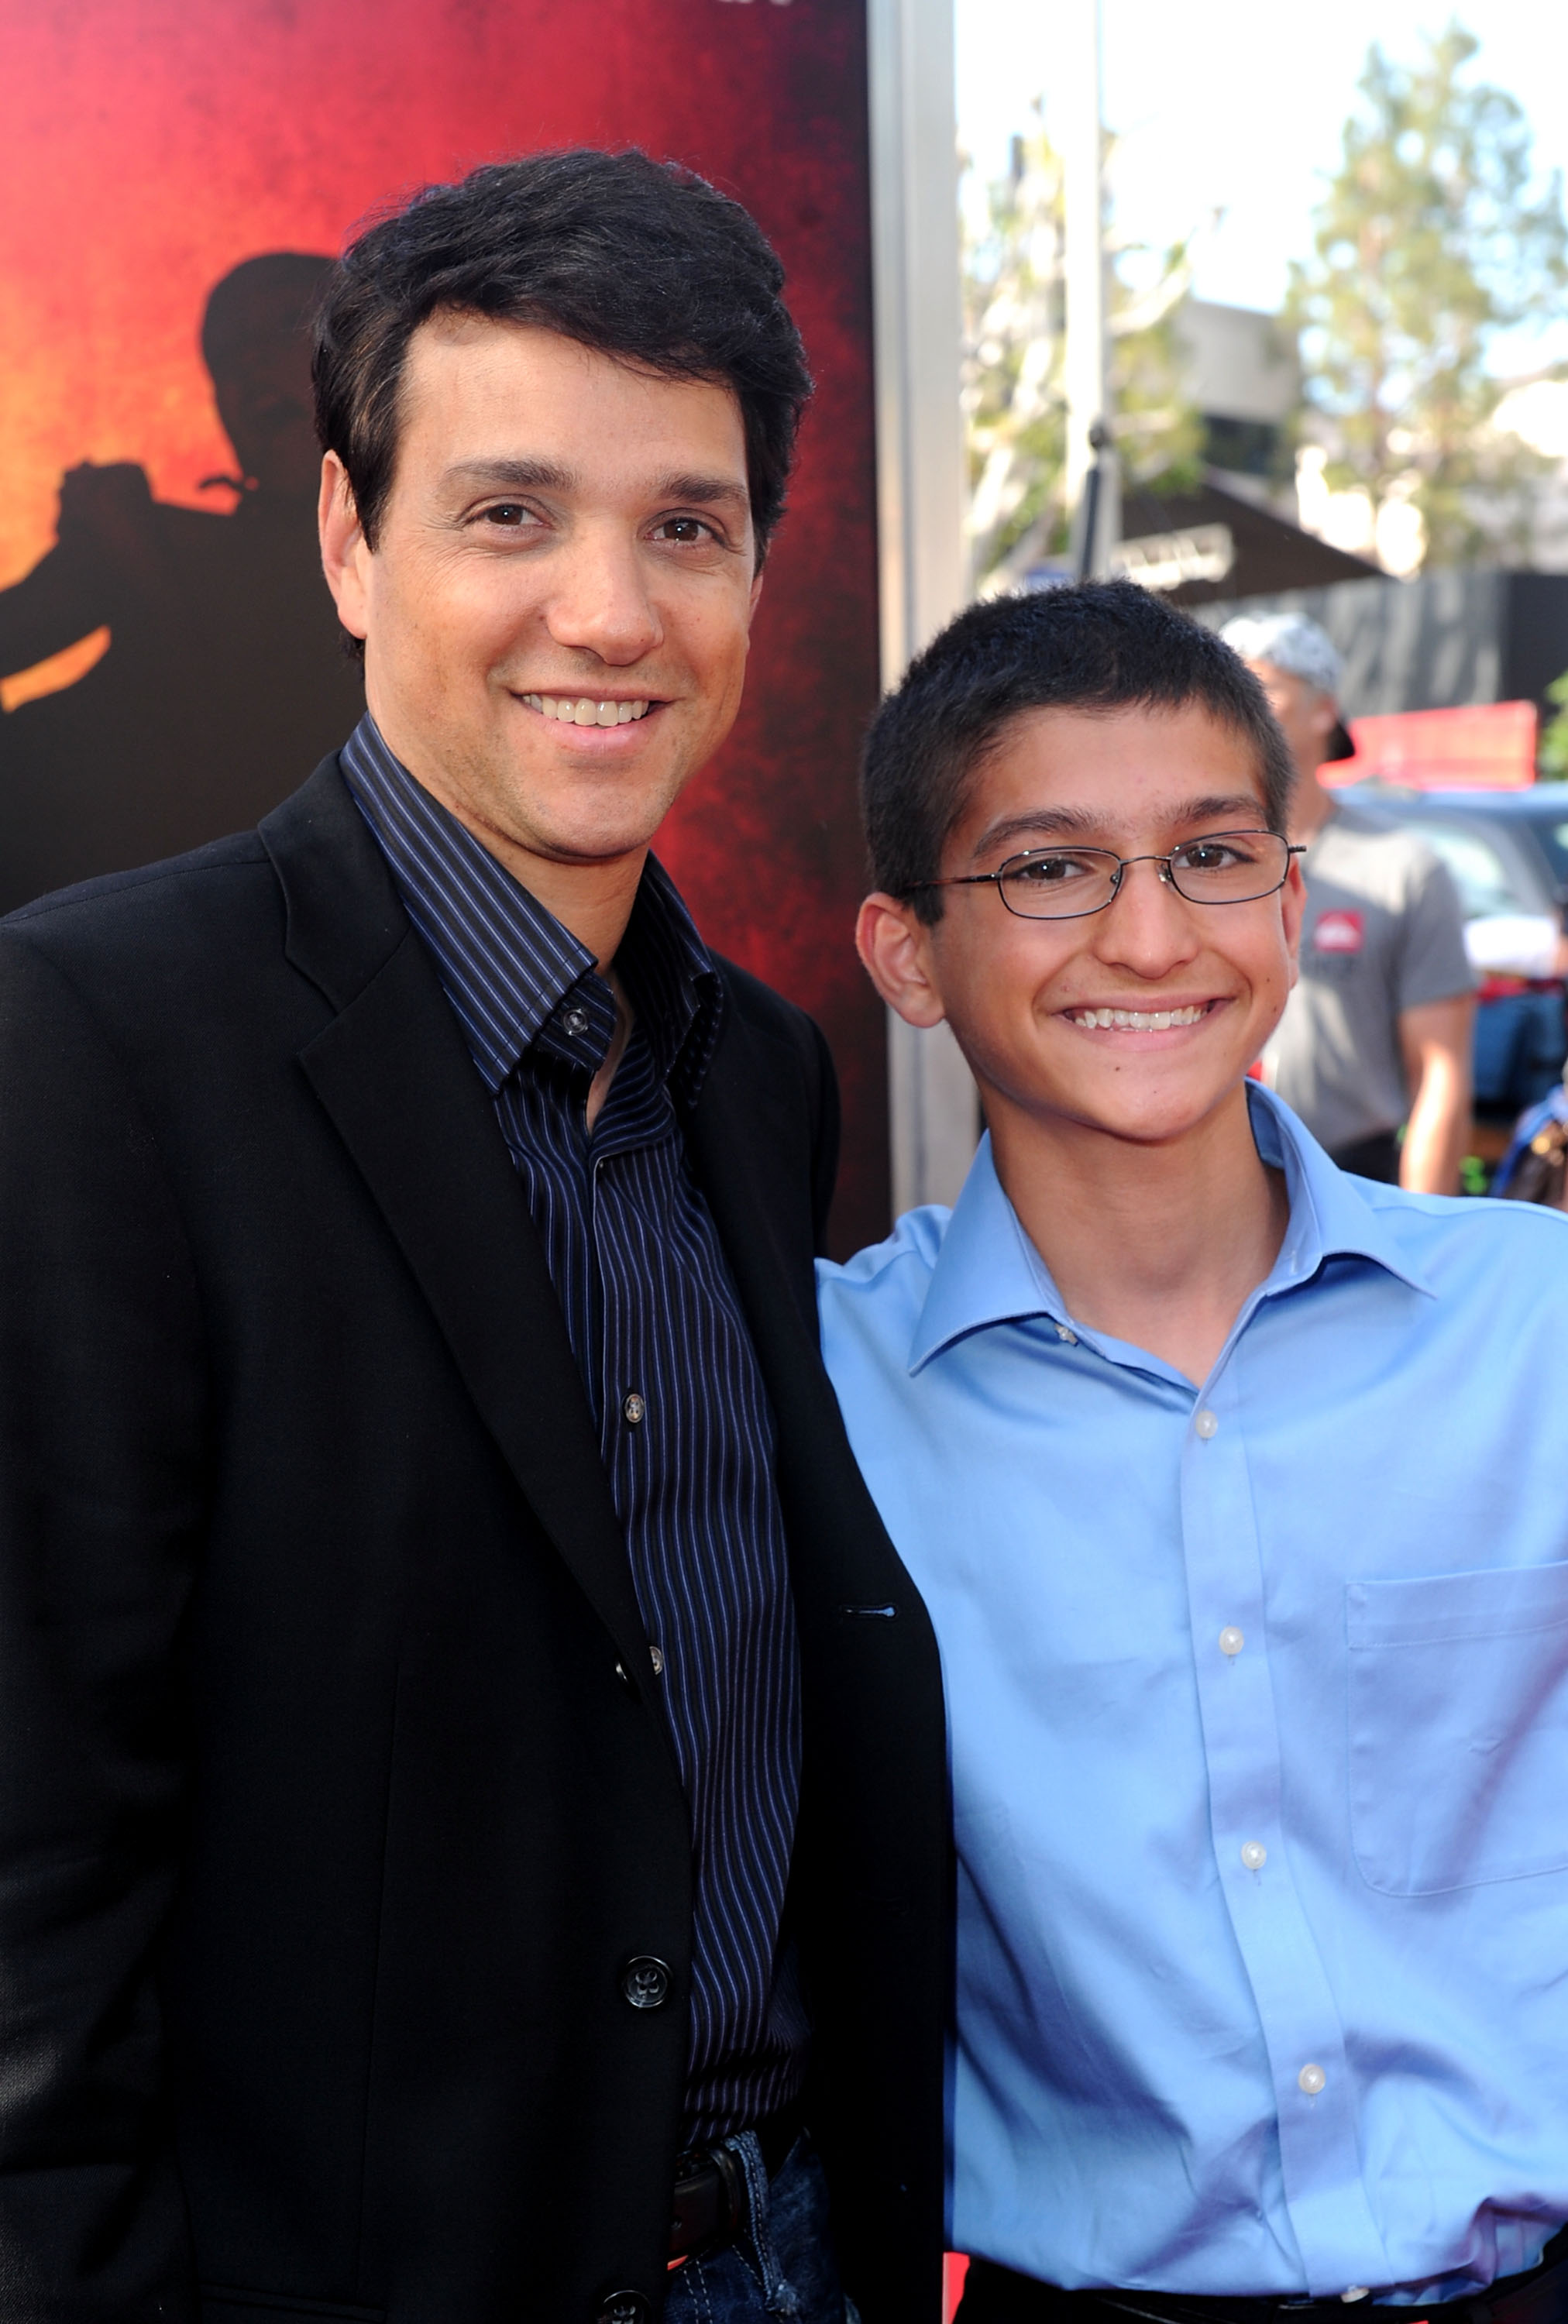 Ralph Macchio’s Family 5 Fast Facts You Need to Know